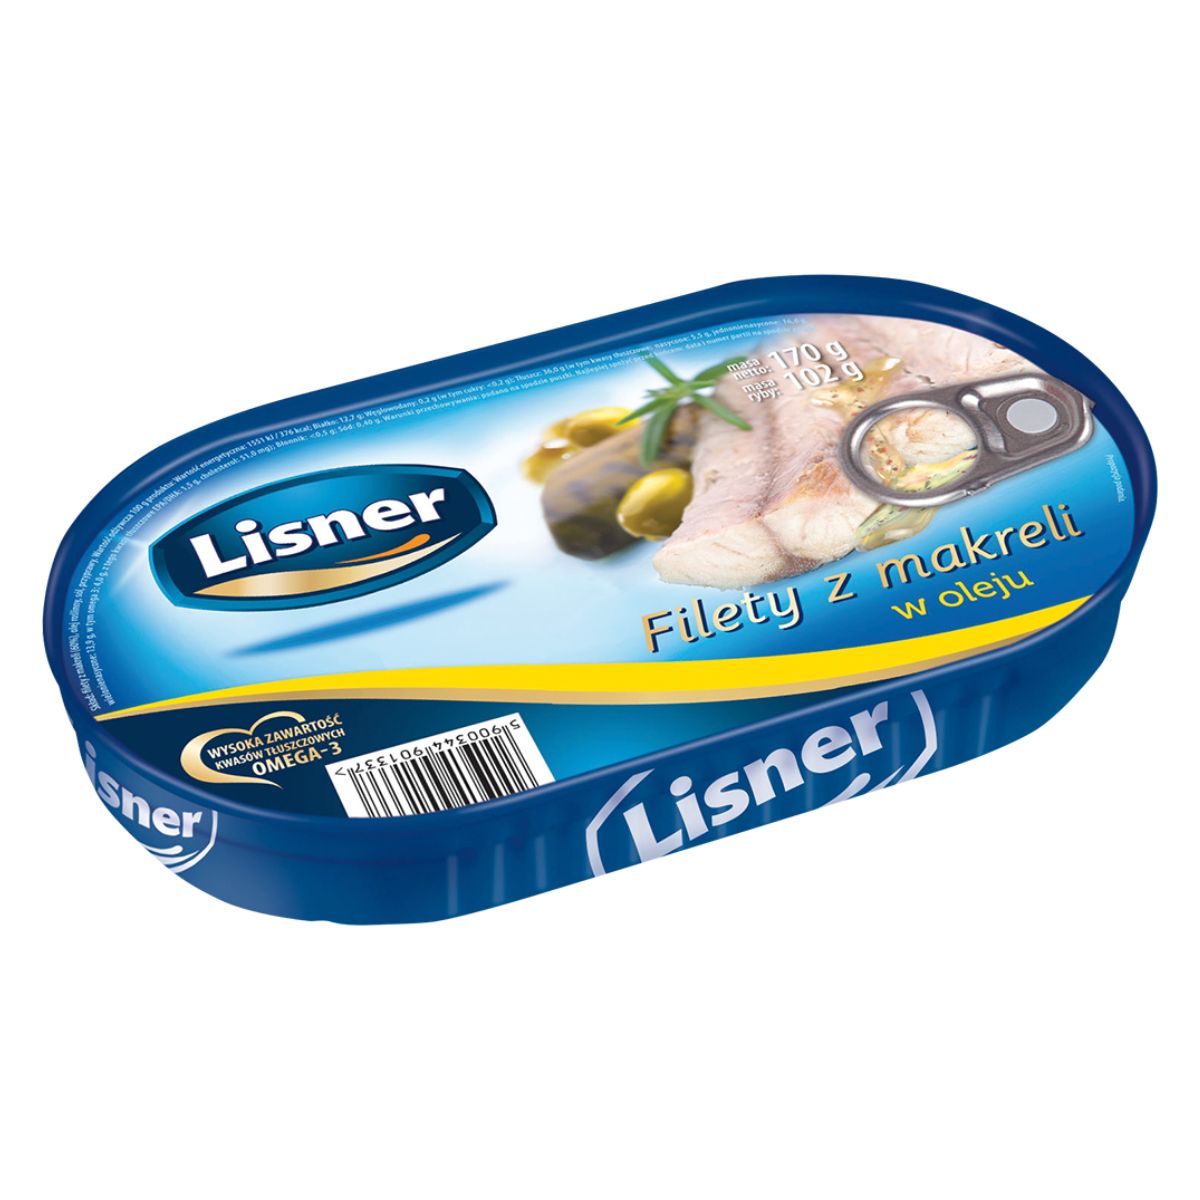 A tin of Lisner - Mackerel Fillets in Oil - 175g on a white background.